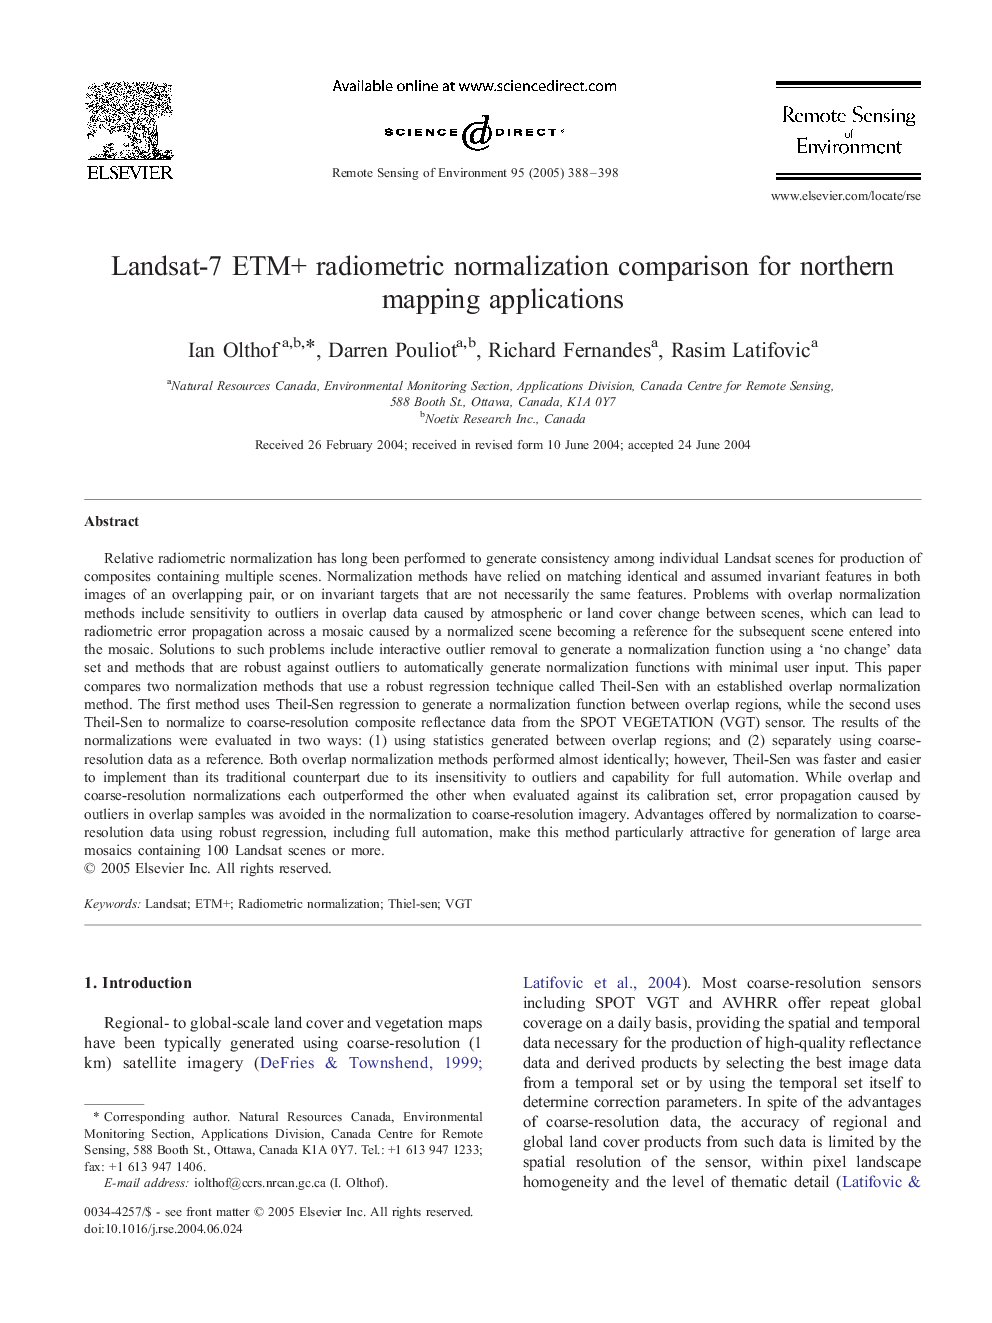 Landsat-7 ETM+ radiometric normalization comparison for northern mapping applications